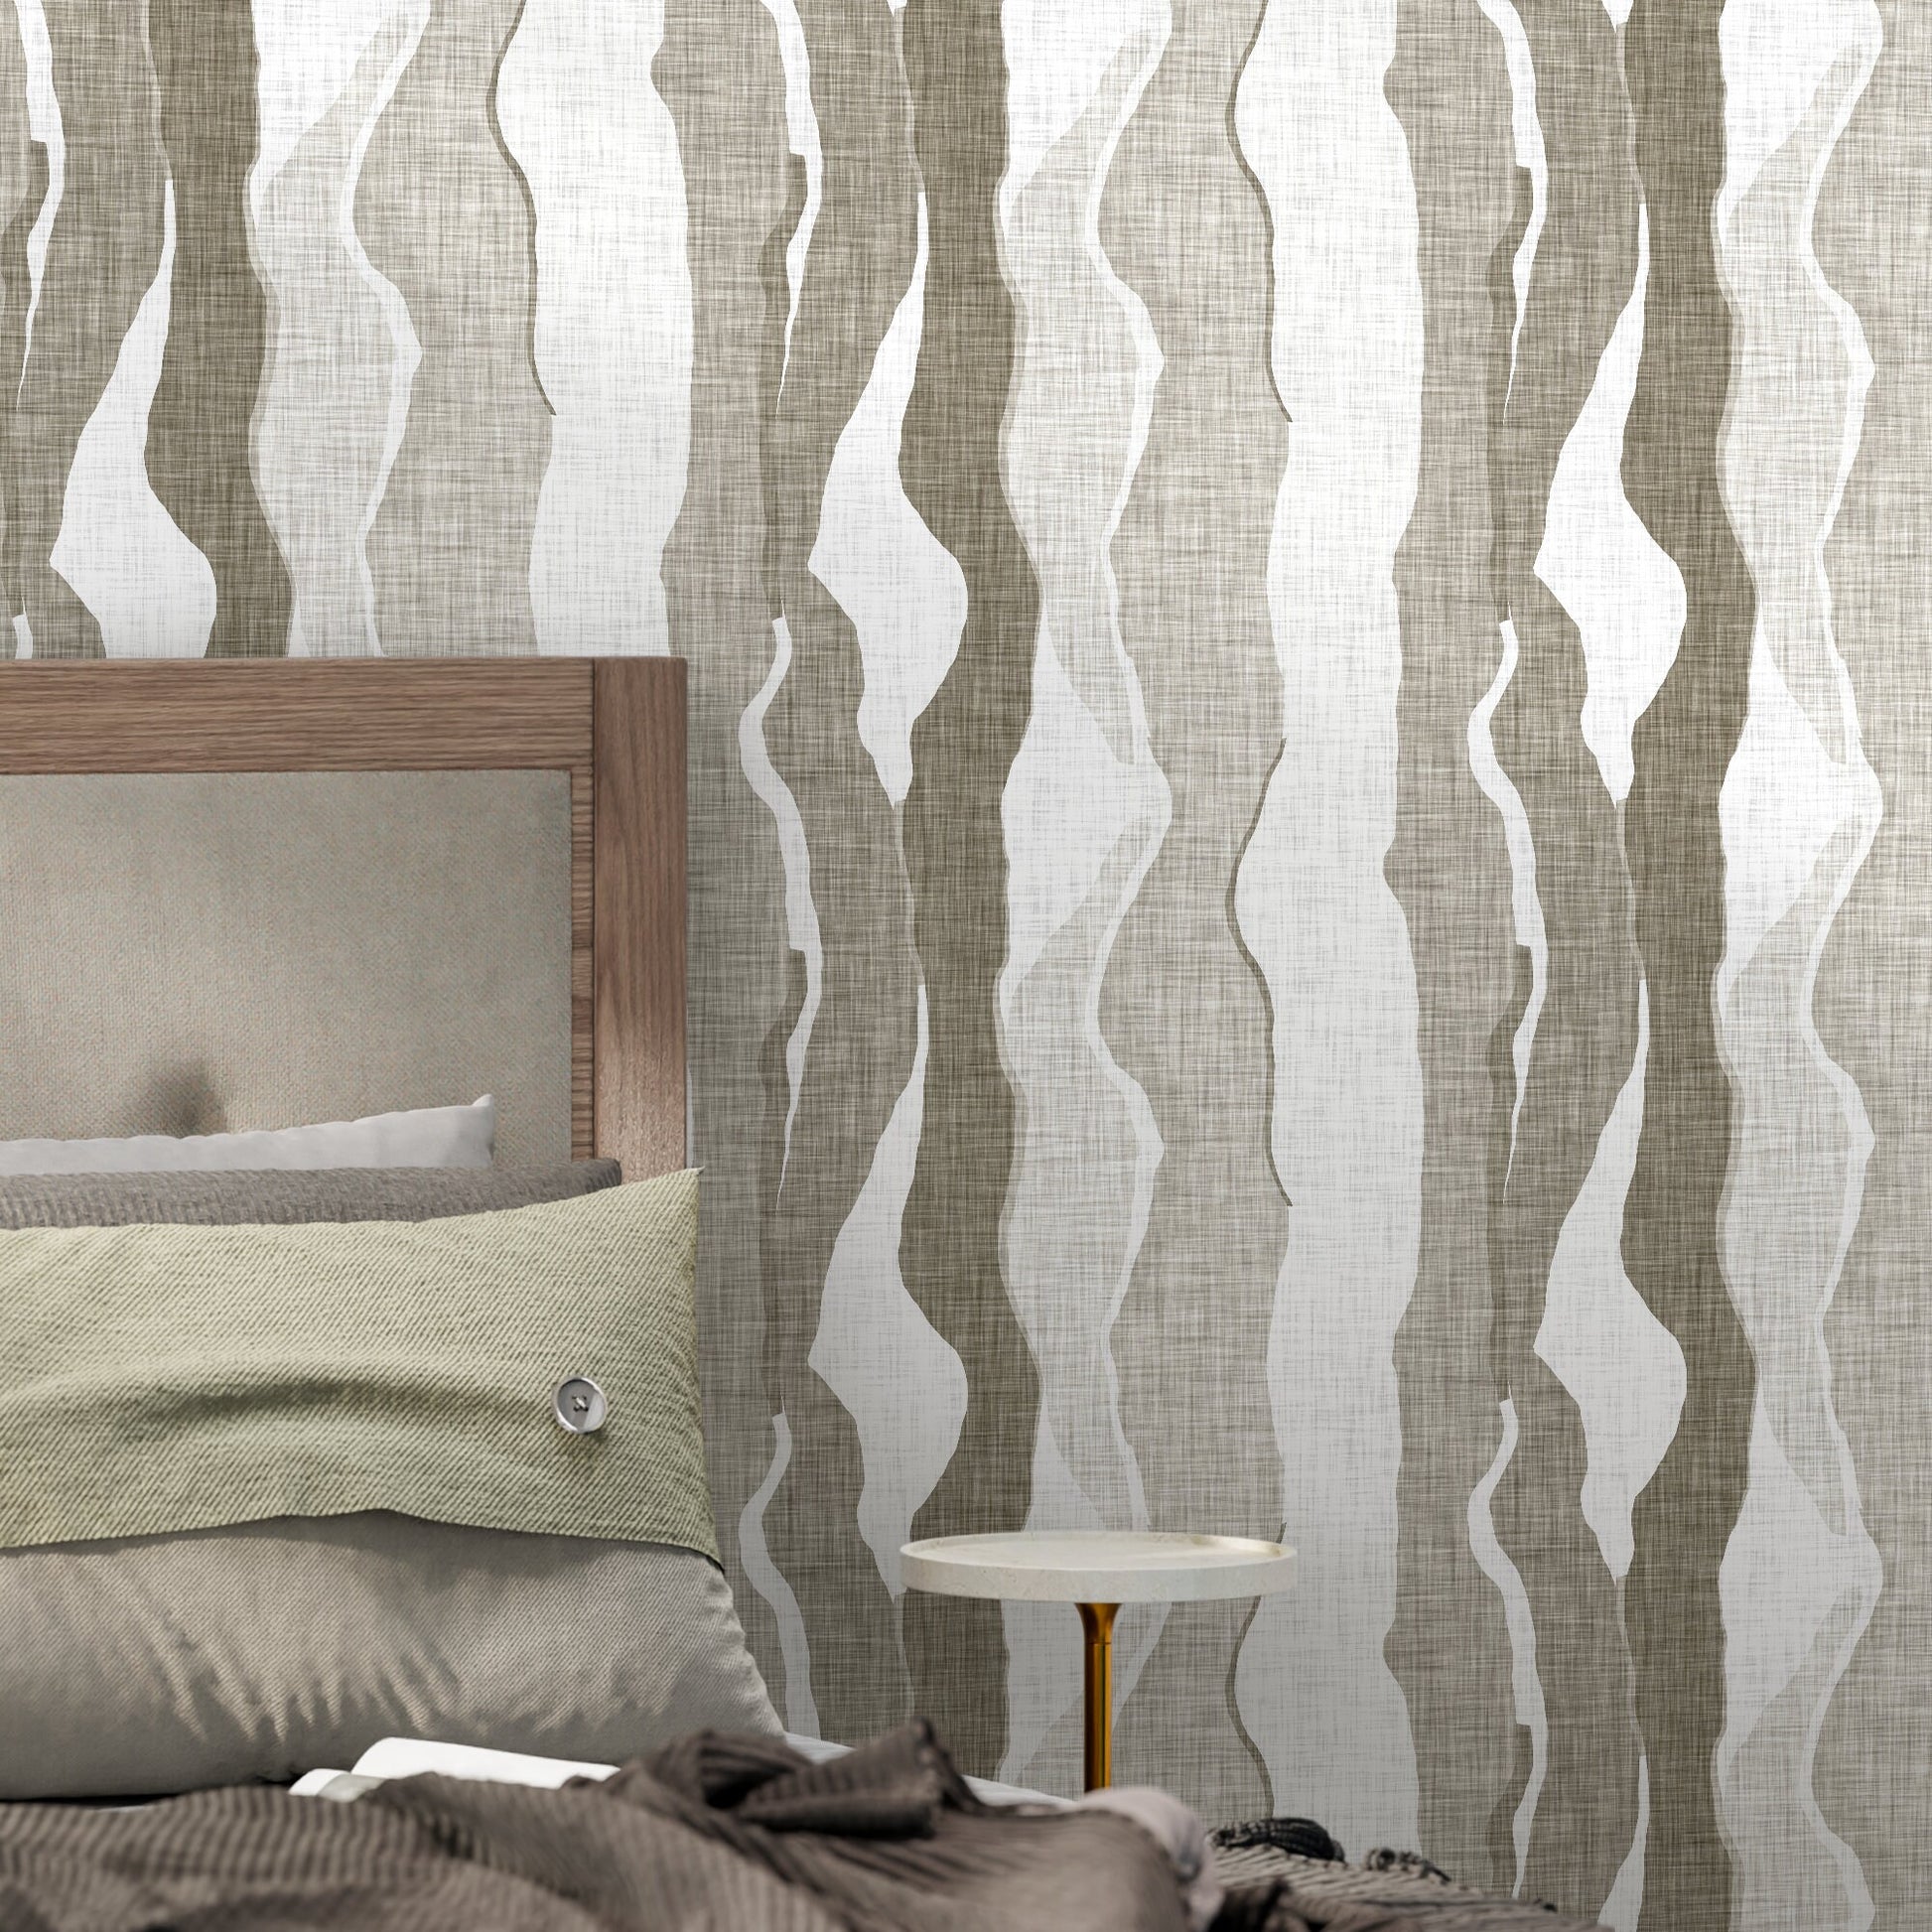 Abstract Waves Wallpaper Modern Wallpaper Peel and Stick and Traditional Wallpaper - D838